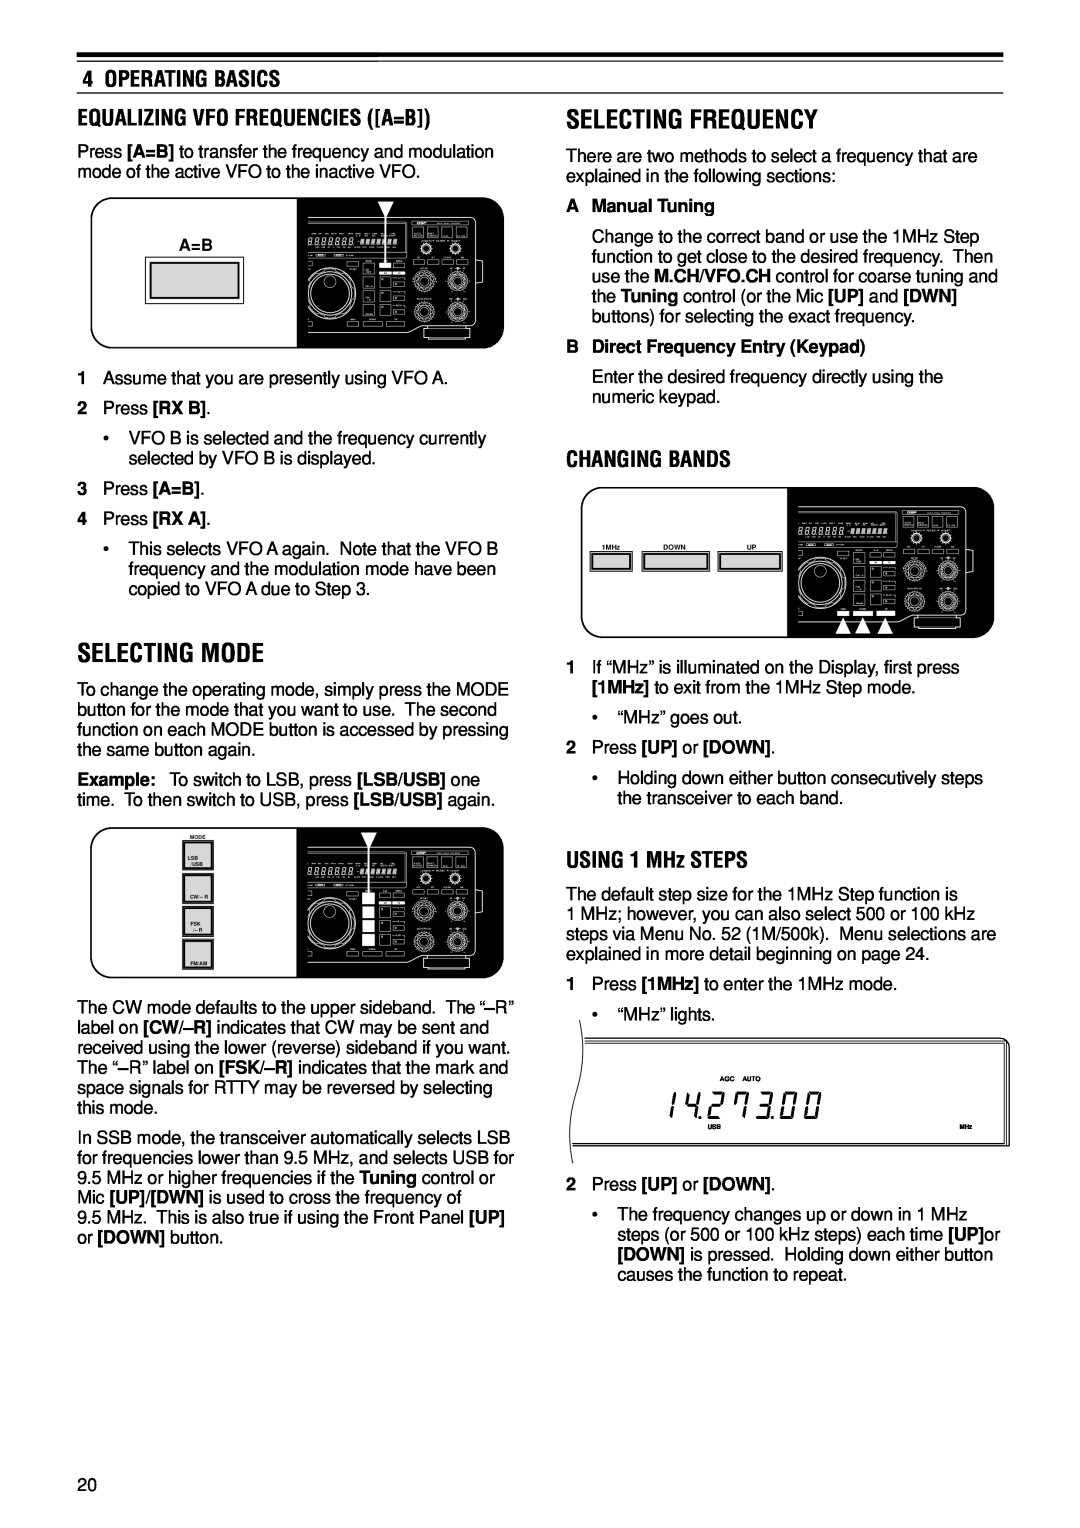 Kenwood TS-870S Selecting Mode, Operating Basics, Equalizing Vfo Frequencies A=B, Changing Bands, USING 1 MHz STEPS 